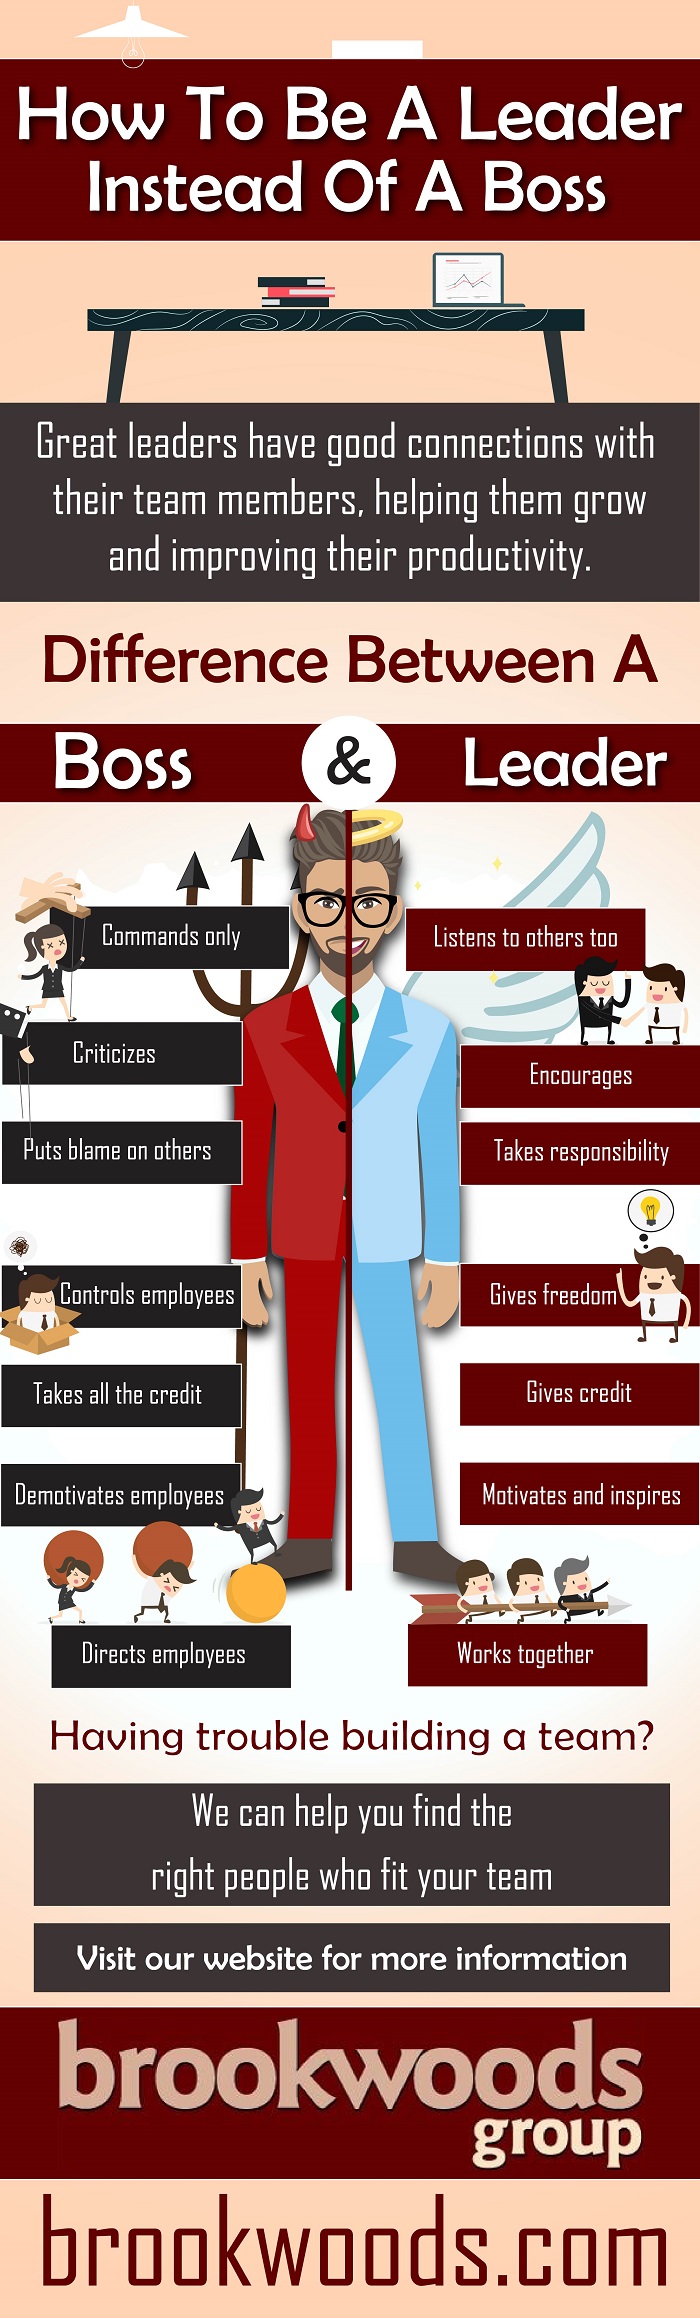 How To Be A Leader Instead Of A Boss